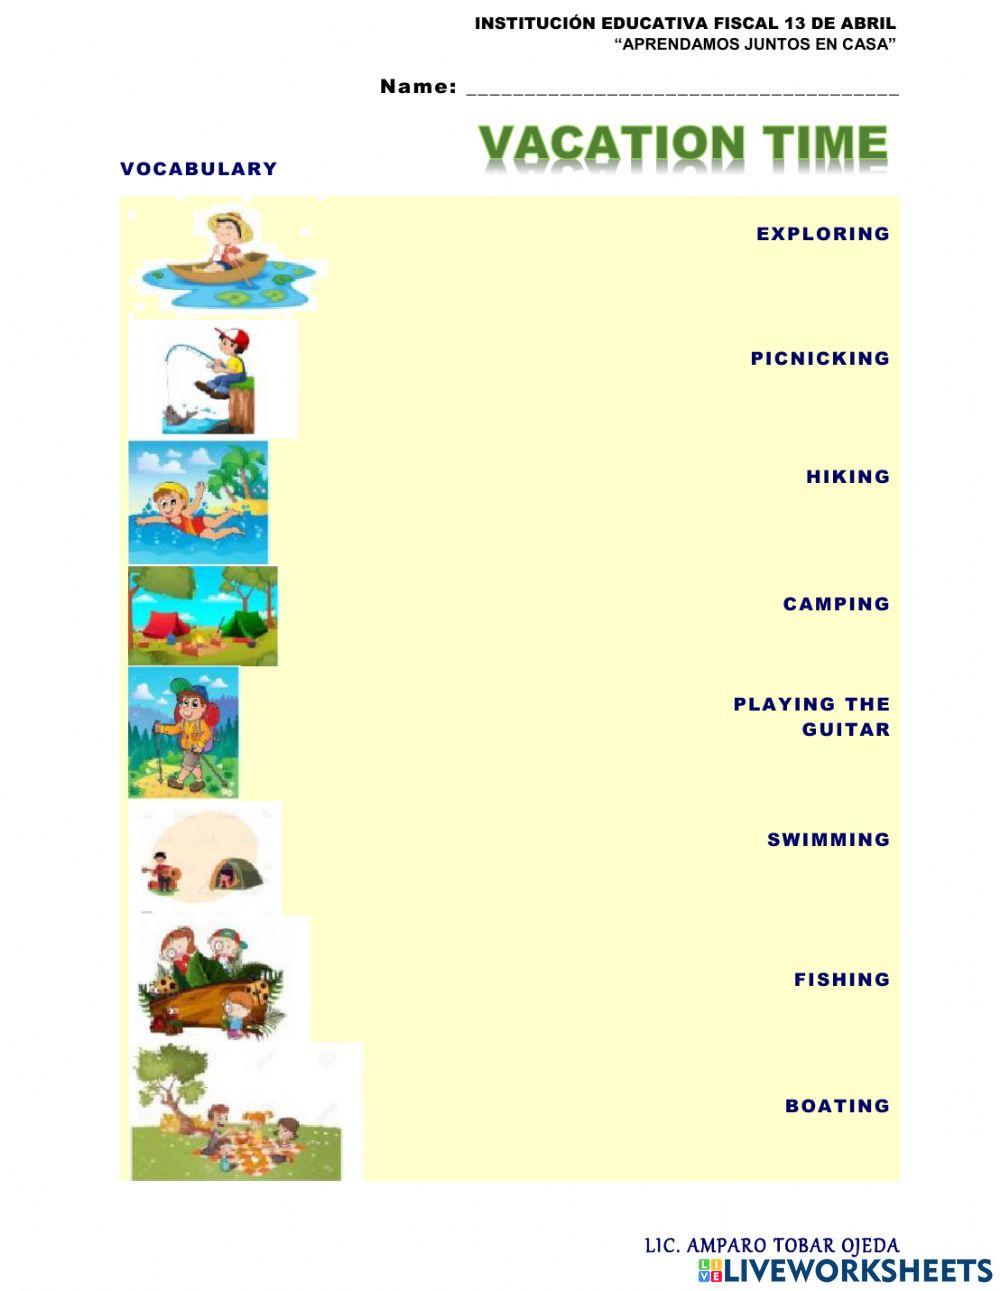 Vacation time vocabulary